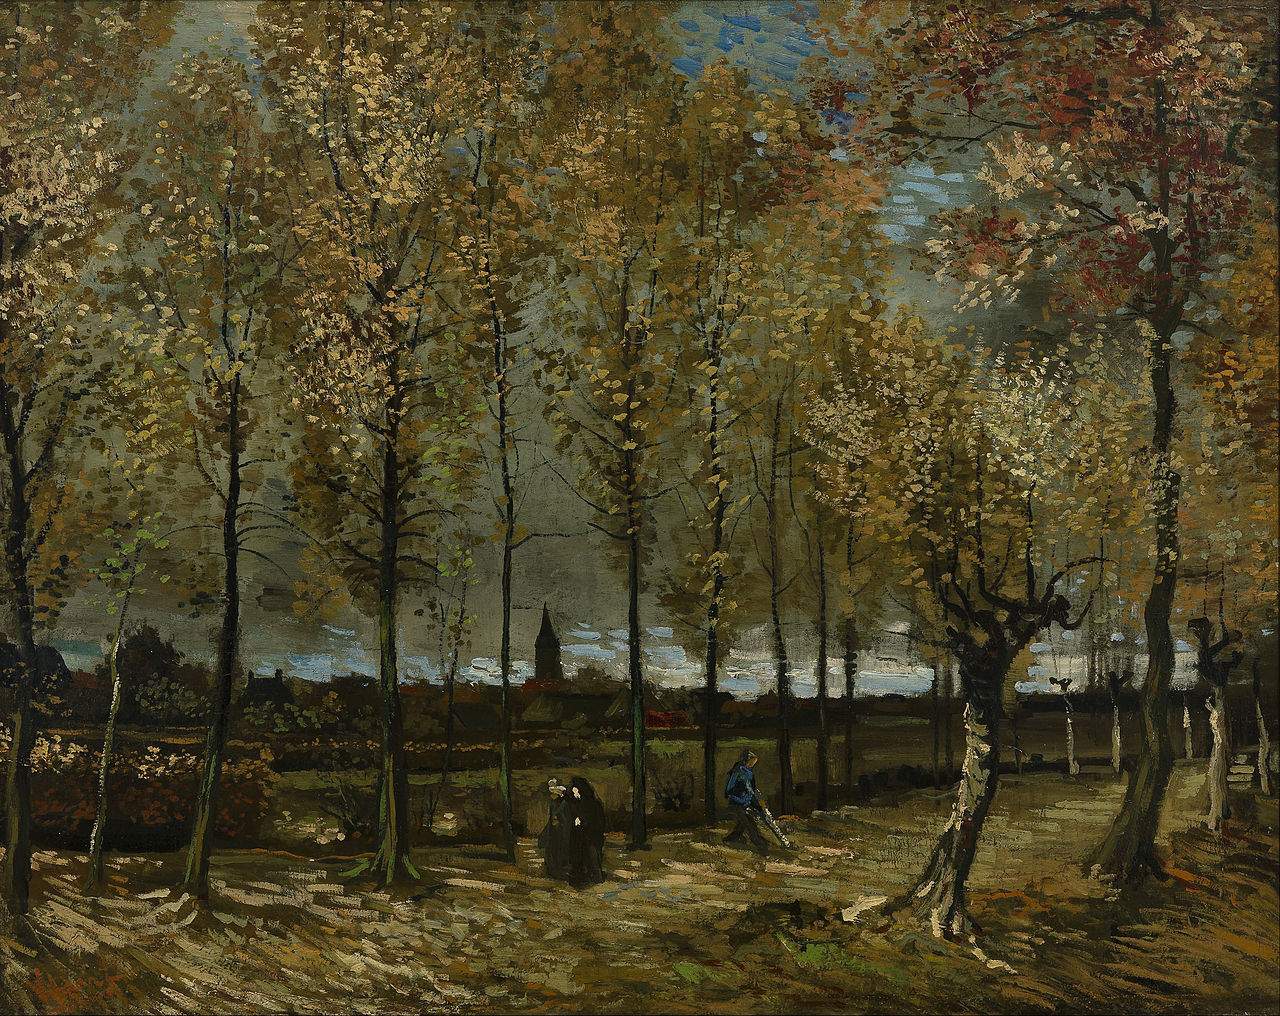 Restoration for the first Van Gogh painting to enter a public museum